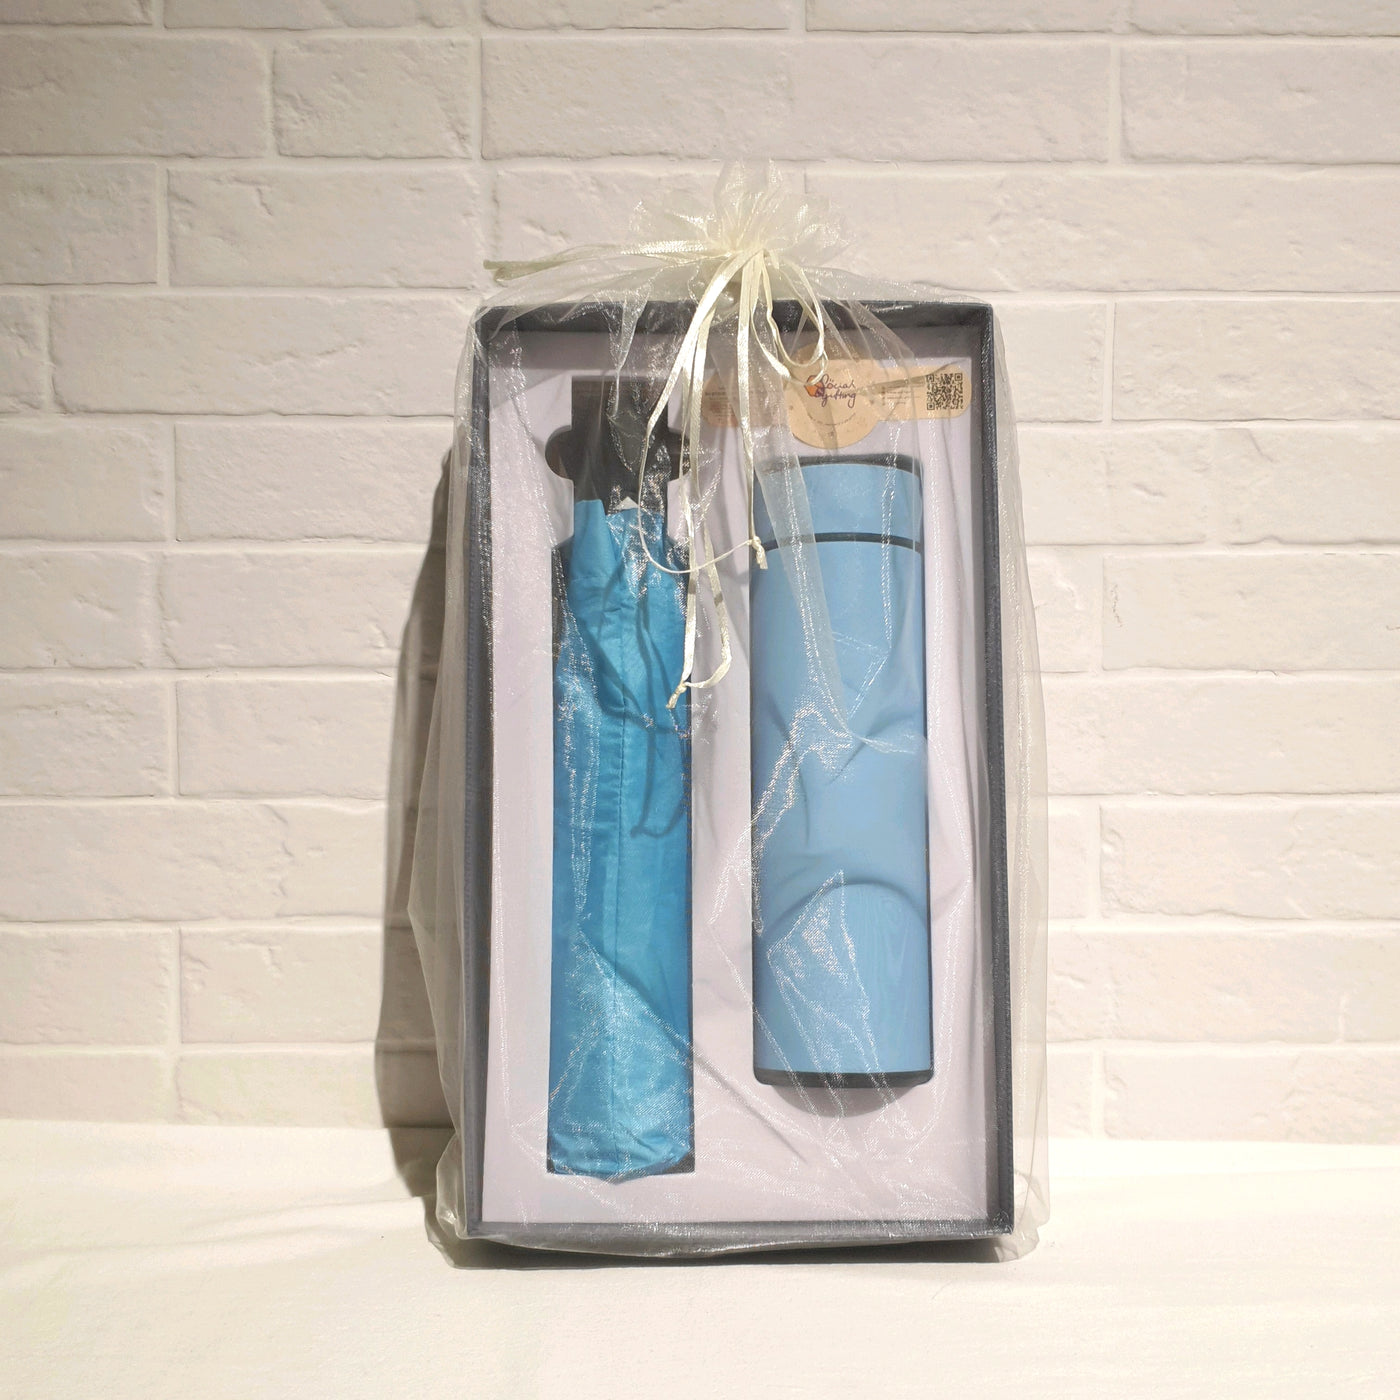 Gift Set - Automatic Umbrella & Thermal Flask